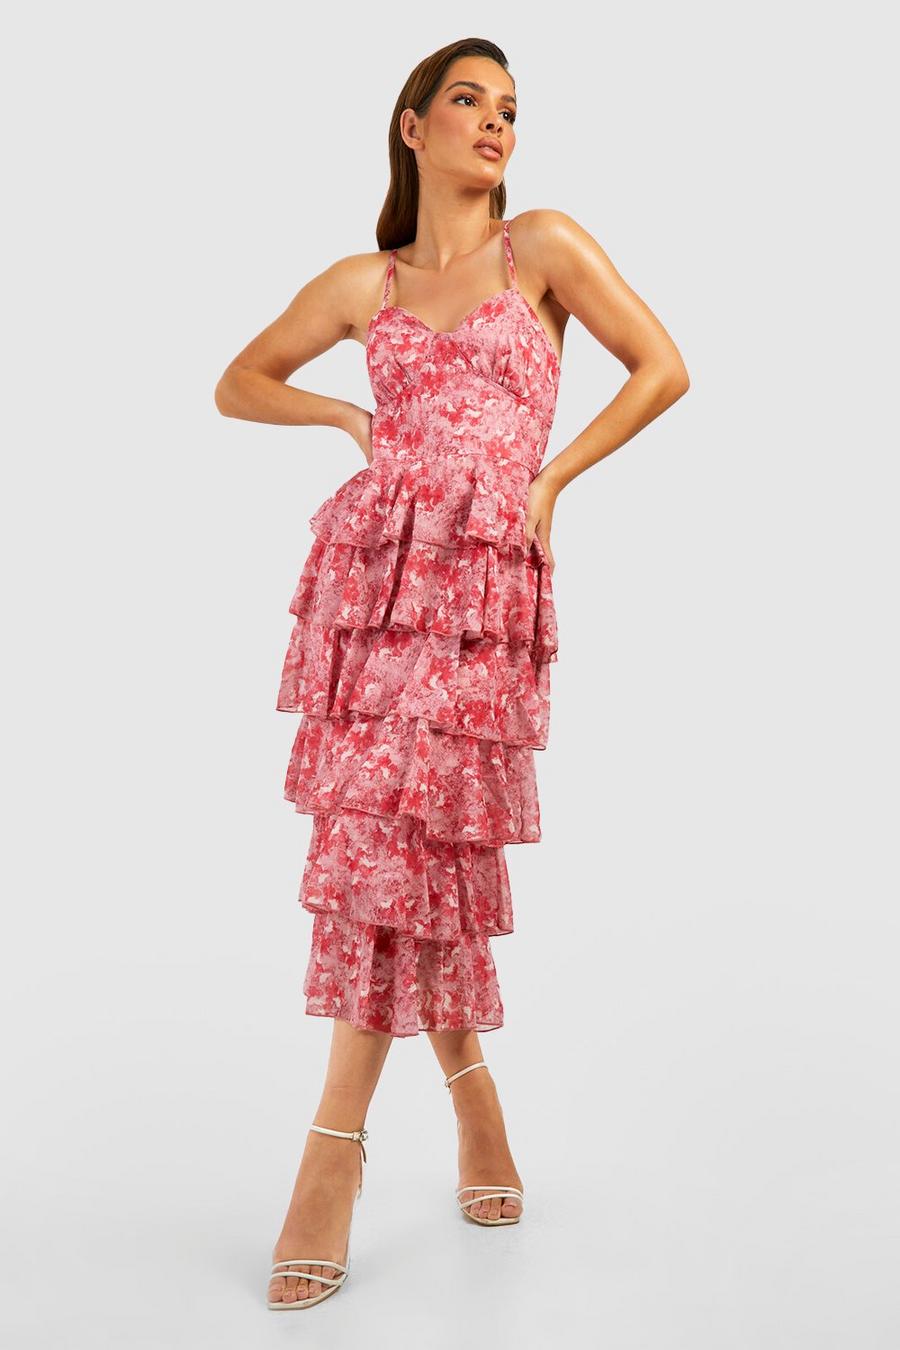 Pink rose Chiffon Floral Tiered Strappy Midi Dress